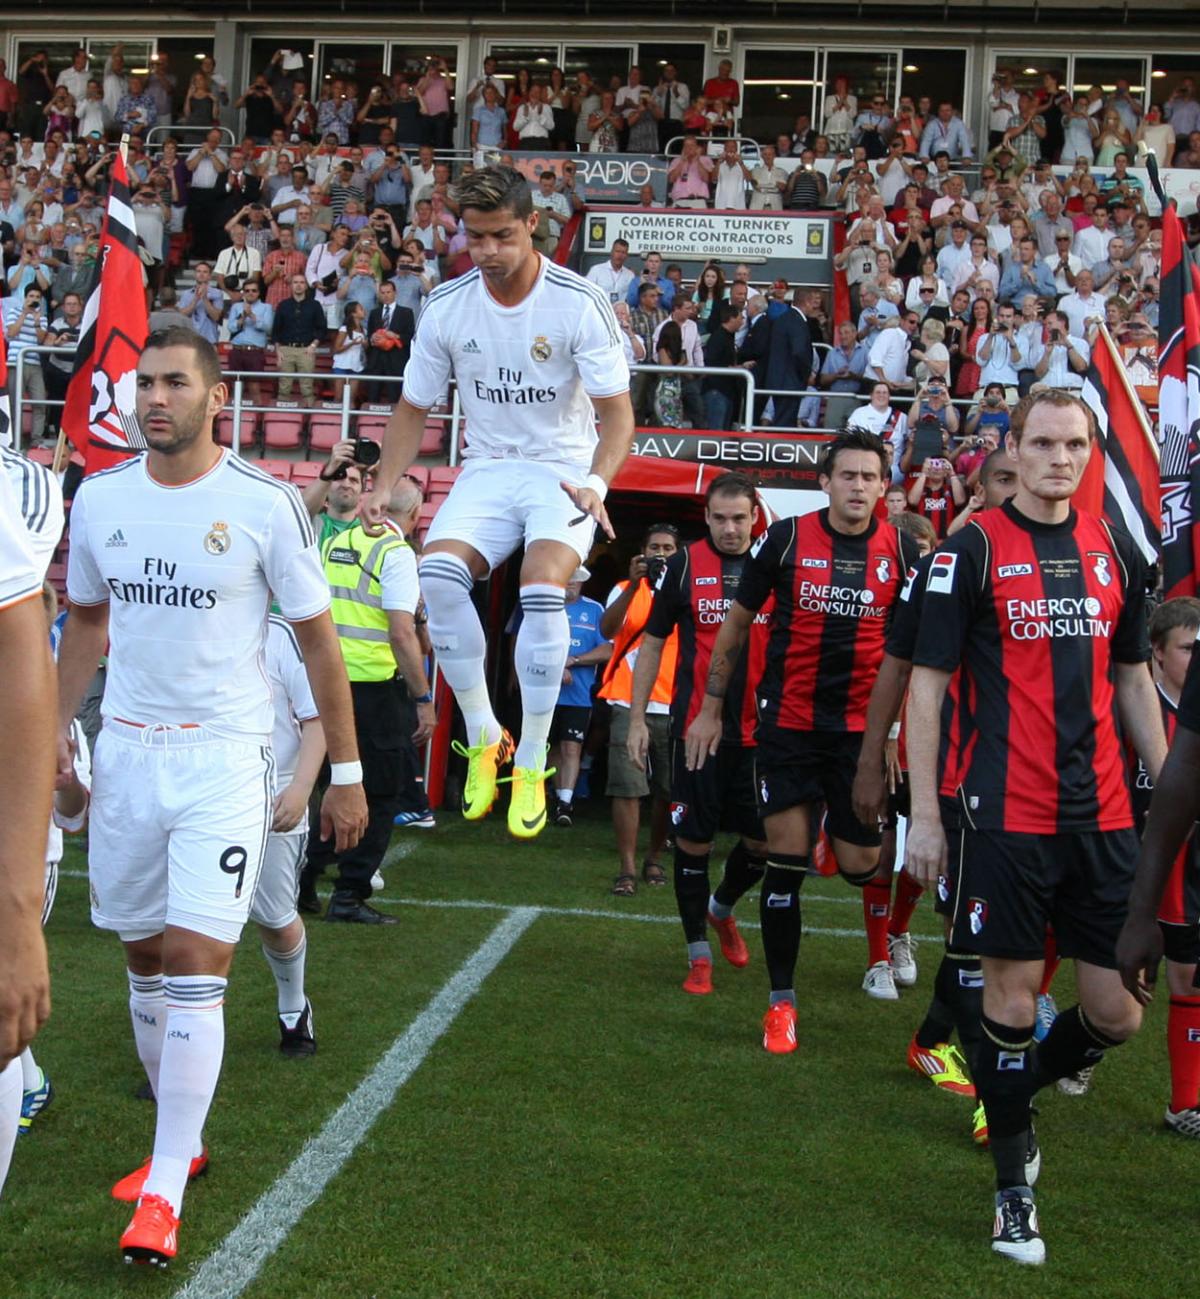 AFC Bournemouth v  Real Madrid  at the Goldsands Stadium.  A selection of the images that are featured in the Daily Echo, AFC Bournemouth Photographic Book.